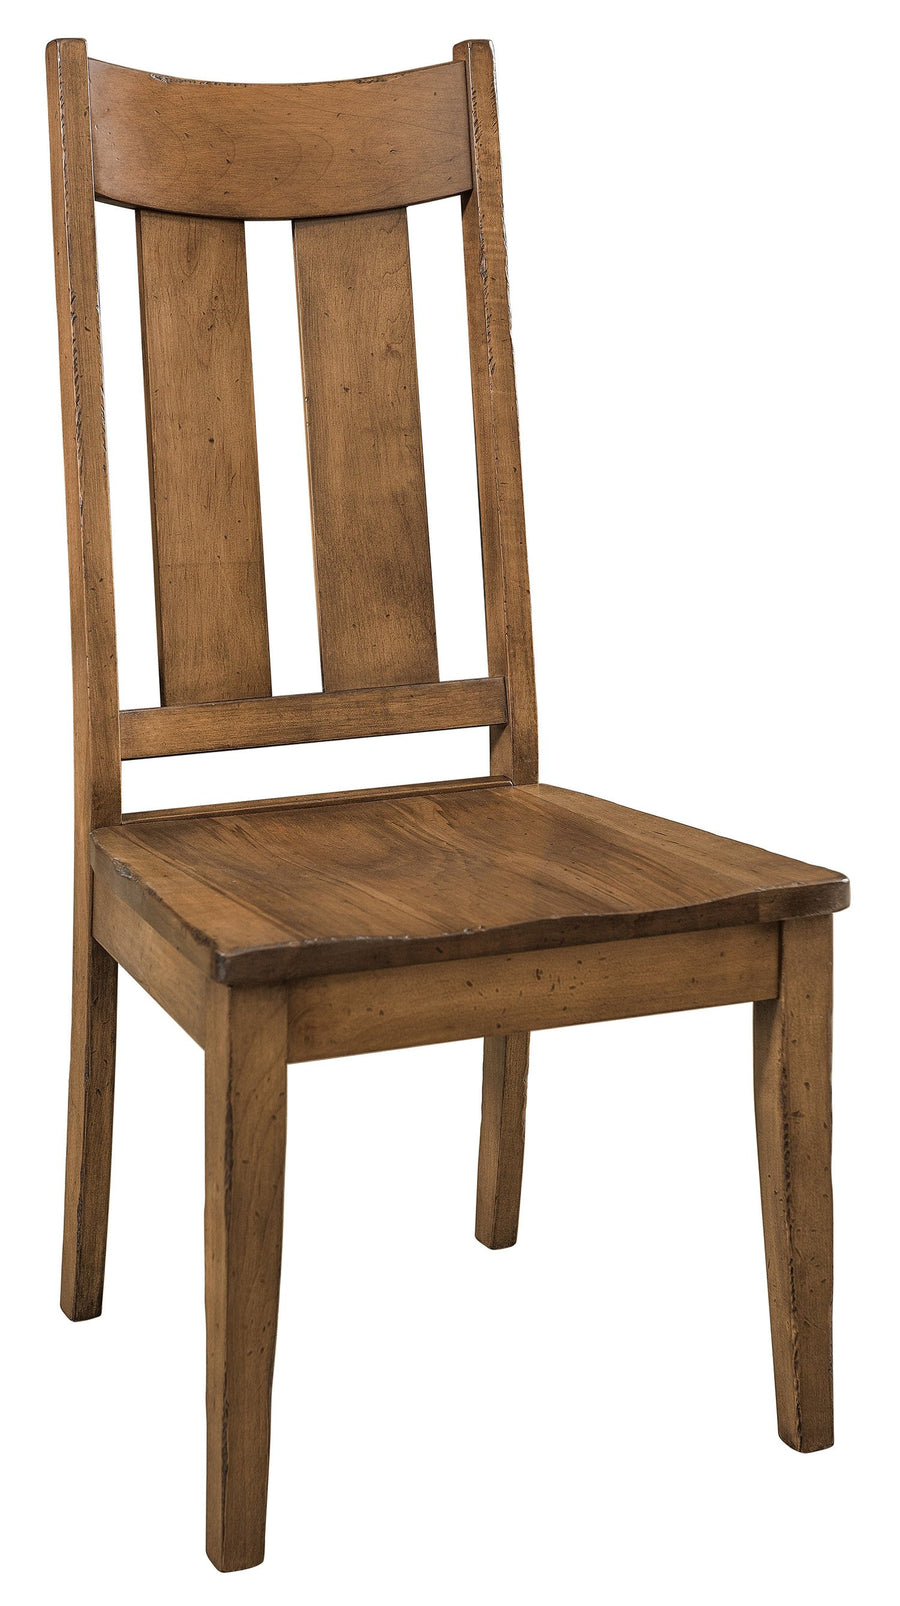 Aspen Amish Side Chair - Foothills Amish Furniture